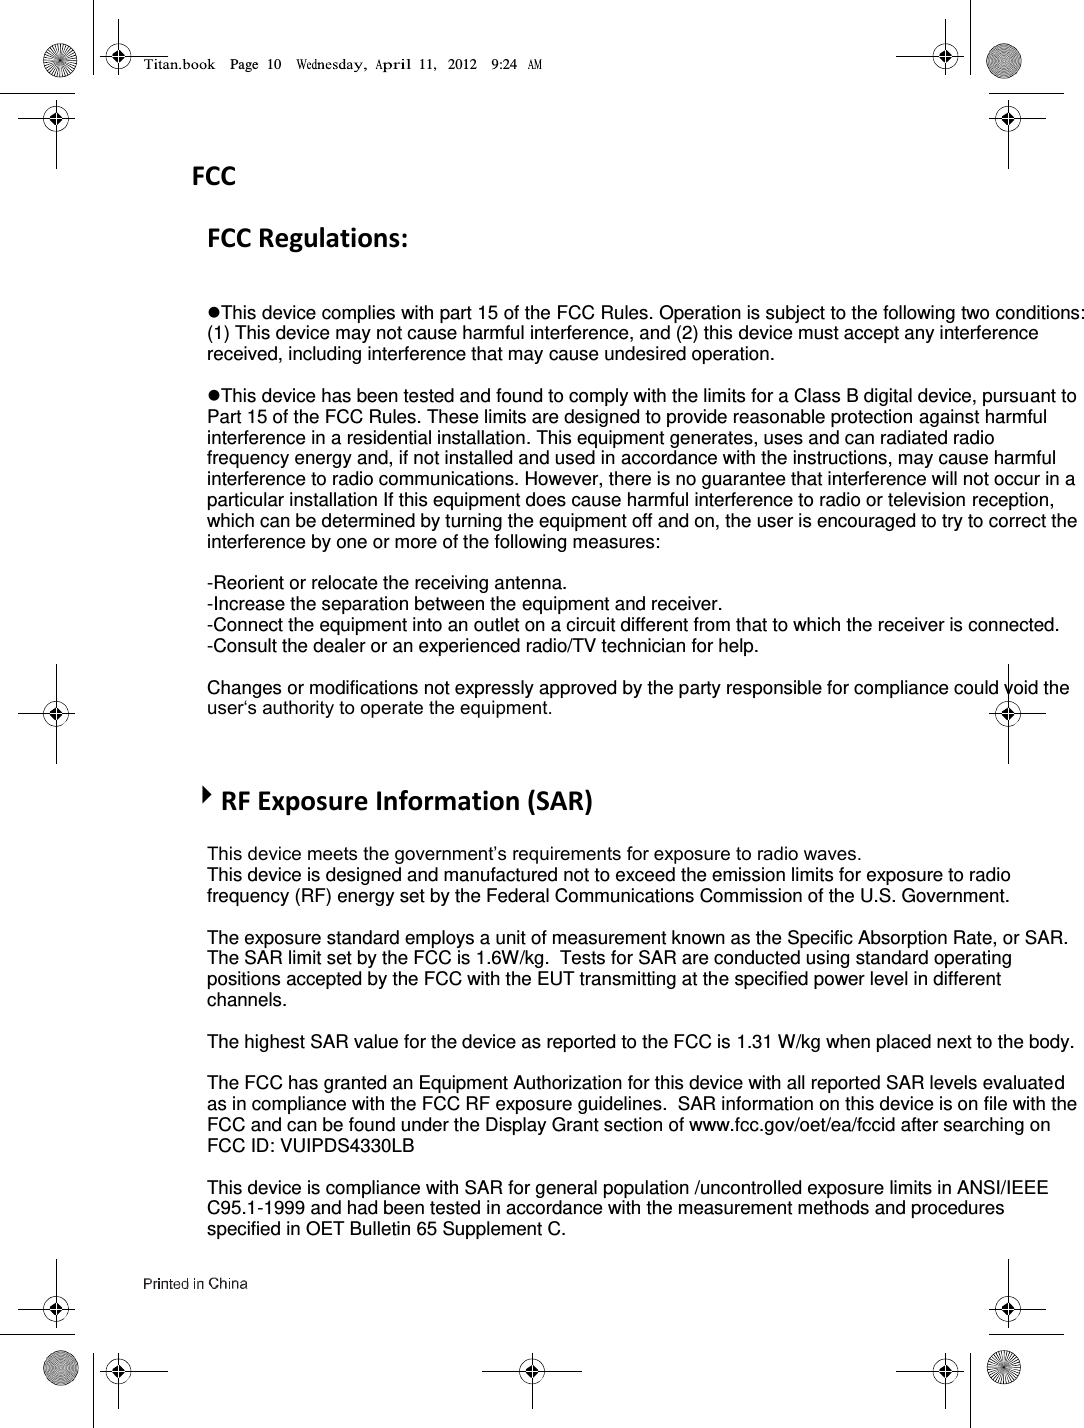 Page  10        11,   2012    9:24       FCC FCC Regulations:  This device complies with part 15 of the FCC Rules. Operation is subject to the following two conditions: (1) This device may not cause harmful interference, and (2) this device must accept any interference received, including interference that may cause undesired operation.  This device has been tested and found to comply with the limits for a Class B digital device, pursuant to Part 15 of the FCC Rules. These limits are designed to provide reasonable protection against harmful interference in a residential installation. This equipment generates, uses and can radiated radio frequency energy and, if not installed and used in accordance with the instructions, may cause harmful interference to radio communications. However, there is no guarantee that interference will not occur in a particular installation If this equipment does cause harmful interference to radio or television reception, which can be determined by turning the equipment off and on, the user is encouraged to try to correct the interference by one or more of the following measures:  -Reorient or relocate the receiving antenna. -Increase the separation between the equipment and receiver. -Connect the equipment into an outlet on a circuit different from that to which the receiver is connected. -Consult the dealer or an experienced radio/TV technician for help.  Changes or modifications not expressly approved by the party responsible for compliance could void the user‘s authority to operate the equipment.  RF Exposure Information (SAR) This device meets the government’s requirements for exposure to radio waves. This device is designed and manufactured not to exceed the emission limits for exposure to radio frequency (RF) energy set by the Federal Communications Commission of the U.S. Government.    The exposure standard employs a unit of measurement known as the Specific Absorption Rate, or SAR.  The SAR limit set by the FCC is 1.6W/kg.  Tests for SAR are conducted using standard operating positions accepted by the FCC with the EUT transmitting at the specified power level in different channels.   The highest SAR value for the device as reported to the FCC is 1.31 W/kg when placed next to the body.    The FCC has granted an Equipment Authorization for this device with all reported SAR levels evaluated as in compliance with the FCC RF exposure guidelines.  SAR information on this device is on file with the FCC and can be found under the Display Grant section of www.fcc.gov/oet/ea/fccid after searching on FCC ID: VUIPDS4330LB  This device is compliance with SAR for general population /uncontrolled exposure limits in ANSI/IEEE C95.1-1999 and had been tested in accordance with the measurement methods and procedures specified in OET Bulletin 65 Supplement C.  